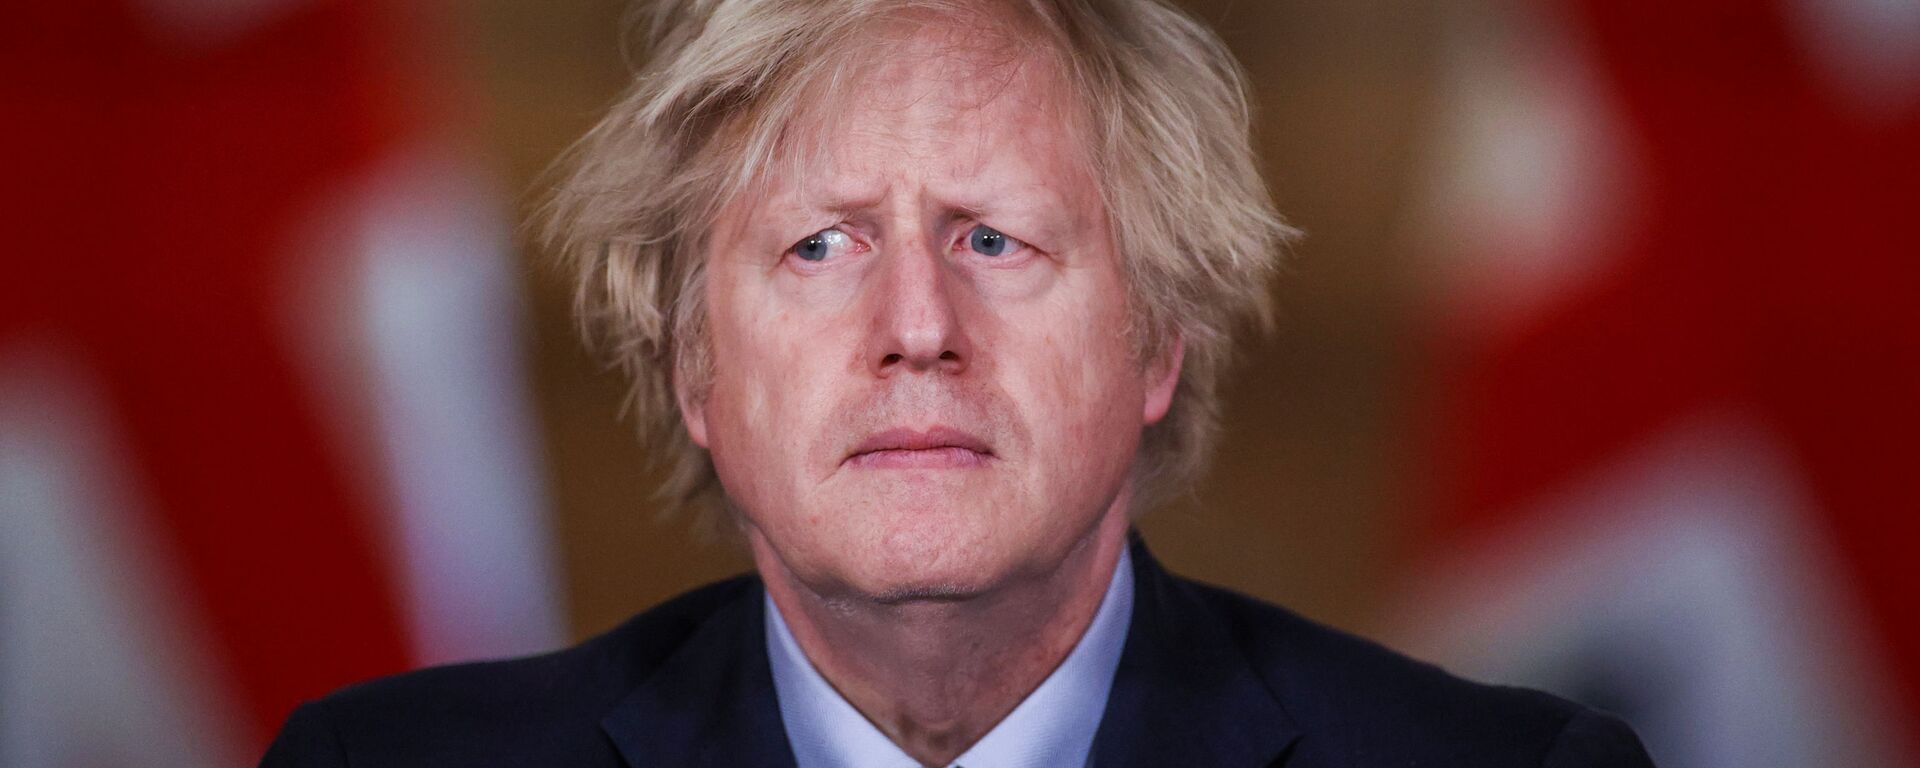 Britain's Prime Minister Boris Johnson holds a news conference at 10 Downing Street, on the day of reflection to mark the anniversary of Britain's first coronavirus disease (COVID-19) lockdown, in London, Britain 23 March 2021 - Sputnik International, 1920, 28.03.2021